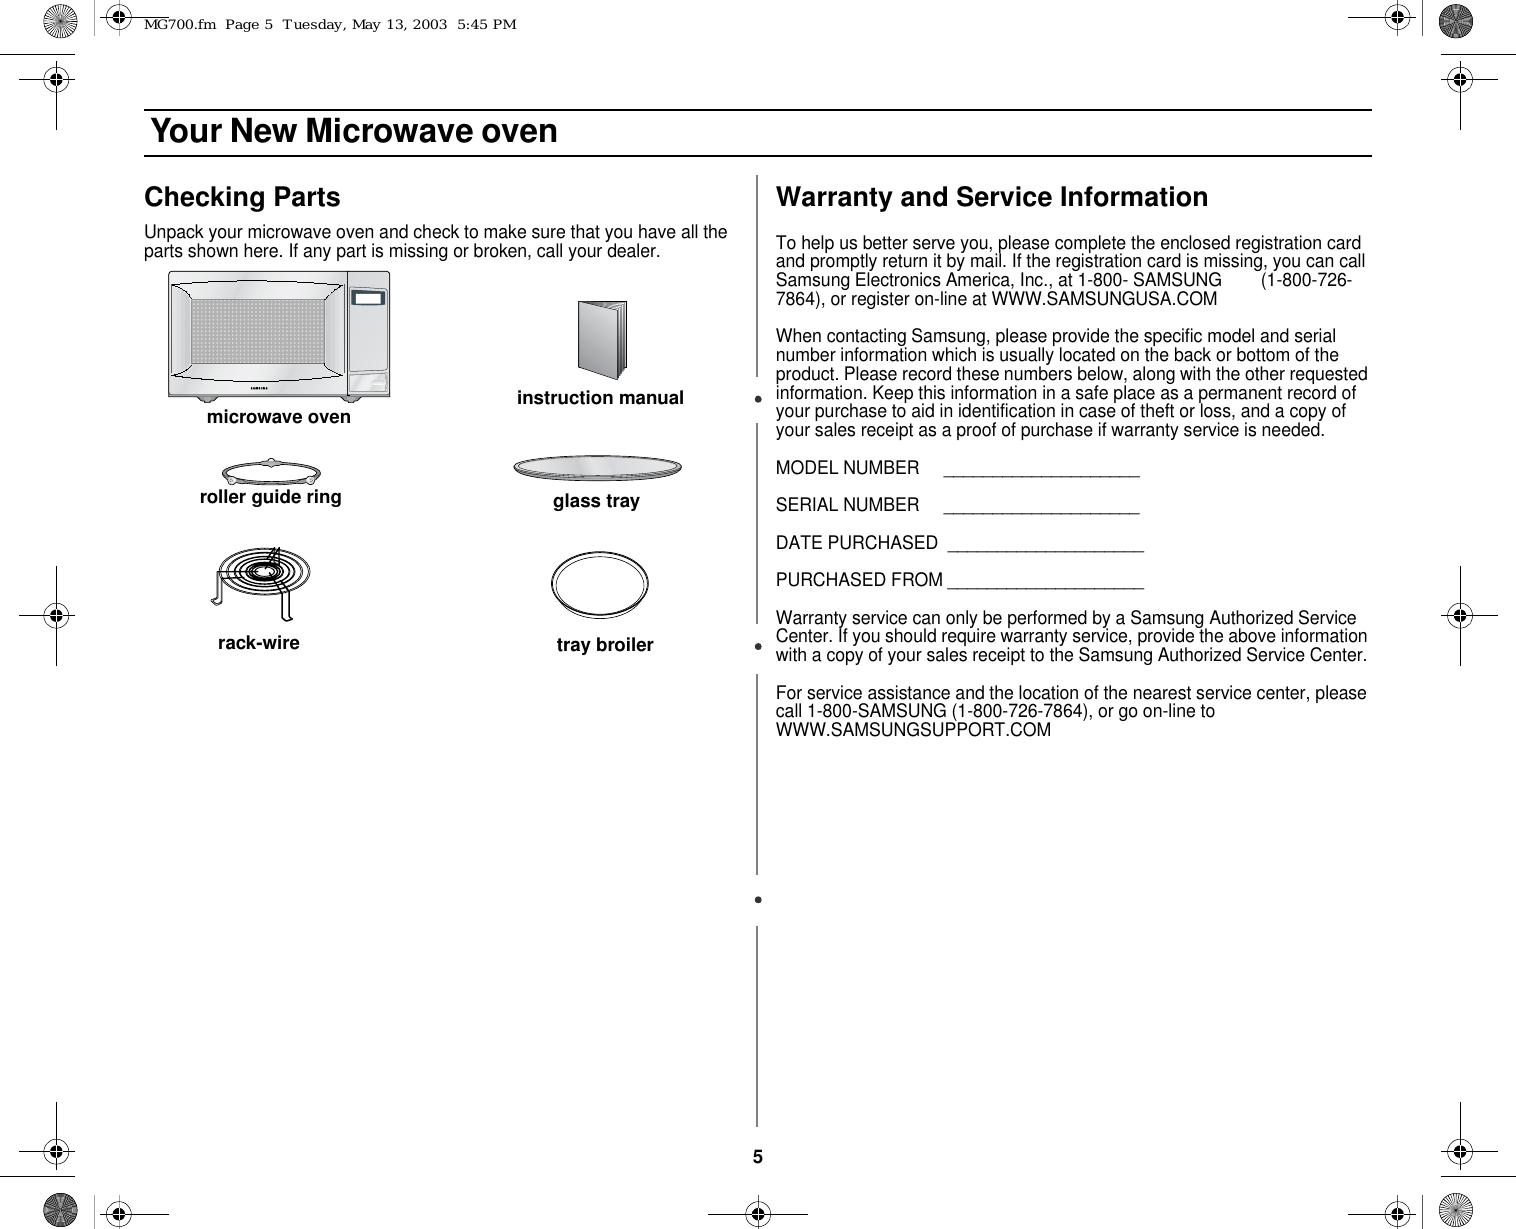 5 Your New Microwave ovenChecking PartsUnpack your microwave oven and check to make sure that you have all the parts shown here. If any part is missing or broken, call your dealer.Warranty and Service InformationTo help us better serve you, please complete the enclosed registration card and promptly return it by mail. If the registration card is missing, you can call Samsung Electronics America, Inc., at 1-800- SAMSUNG        (1-800-726-7864), or register on-line at WWW.SAMSUNGUSA.COMWhen contacting Samsung, please provide the specific model and serial number information which is usually located on the back or bottom of the product. Please record these numbers below, along with the other requested information. Keep this information in a safe place as a permanent record of your purchase to aid in identification in case of theft or loss, and a copy of your sales receipt as a proof of purchase if warranty service is needed.MODEL NUMBER     ____________________SERIAL NUMBER     ____________________DATE PURCHASED  ____________________PURCHASED FROM ____________________Warranty service can only be performed by a Samsung Authorized Service Center. If you should require warranty service, provide the above information with a copy of your sales receipt to the Samsung Authorized Service Center. For service assistance and the location of the nearest service center, please call 1-800-SAMSUNG (1-800-726-7864), or go on-line to WWW.SAMSUNGSUPPORT.COMmicrowave ovenglass trayroller guide ringinstruction manualrack-wire tray broilerMG700.fm  Page 5  Tuesday, May 13, 2003  5:45 PM